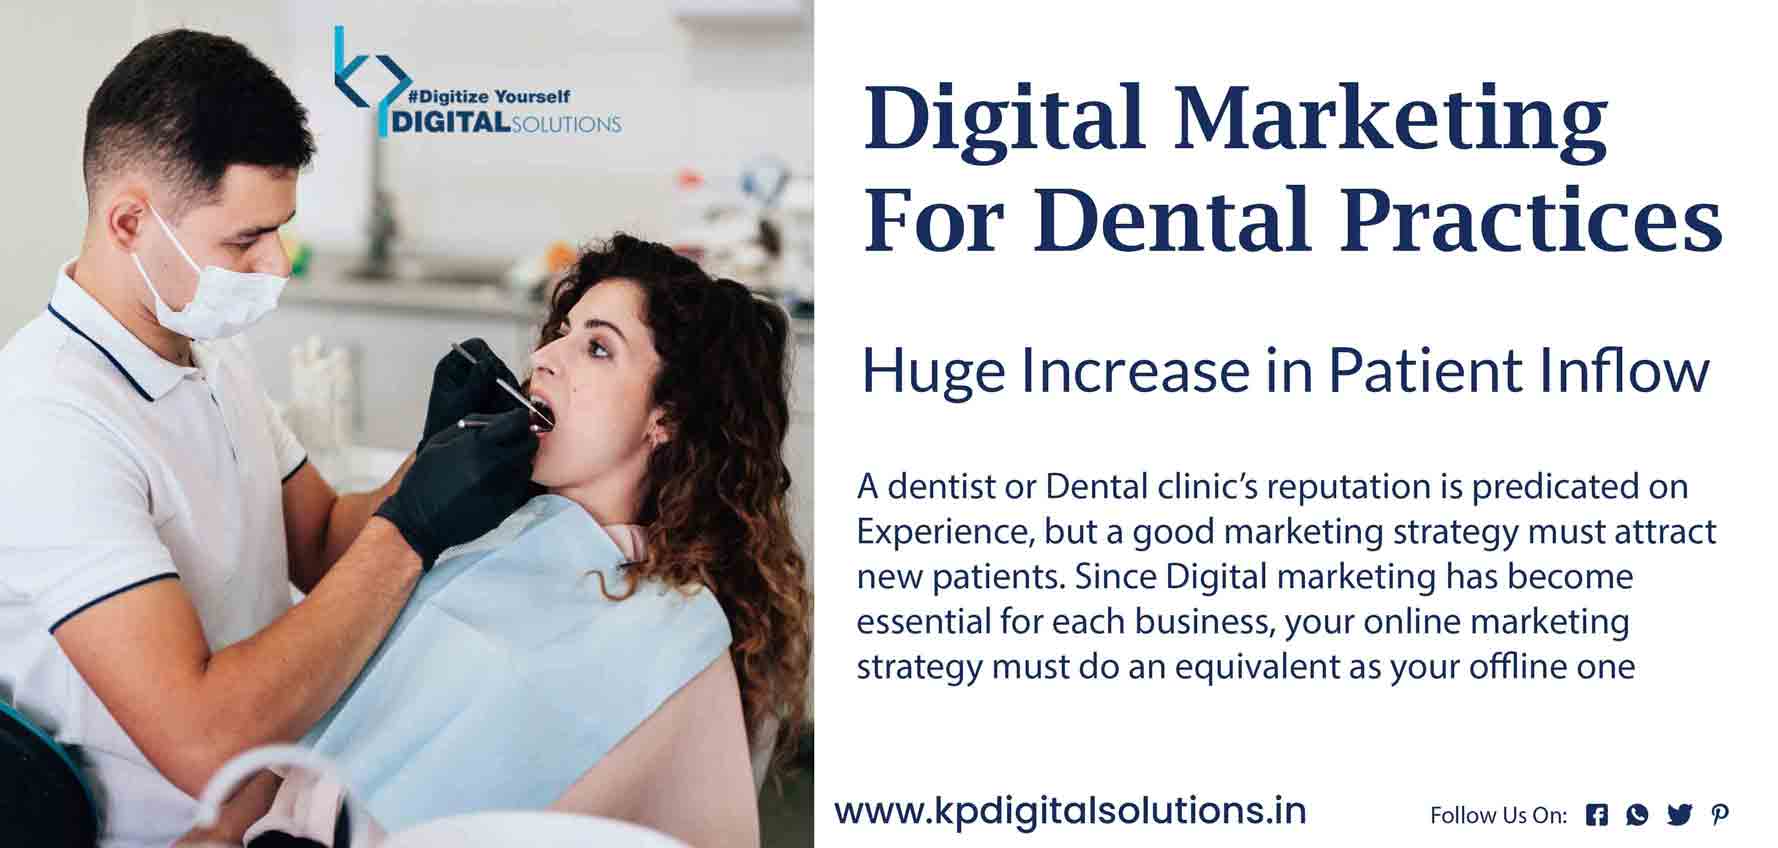 dental Practices can benefit from digital marketing